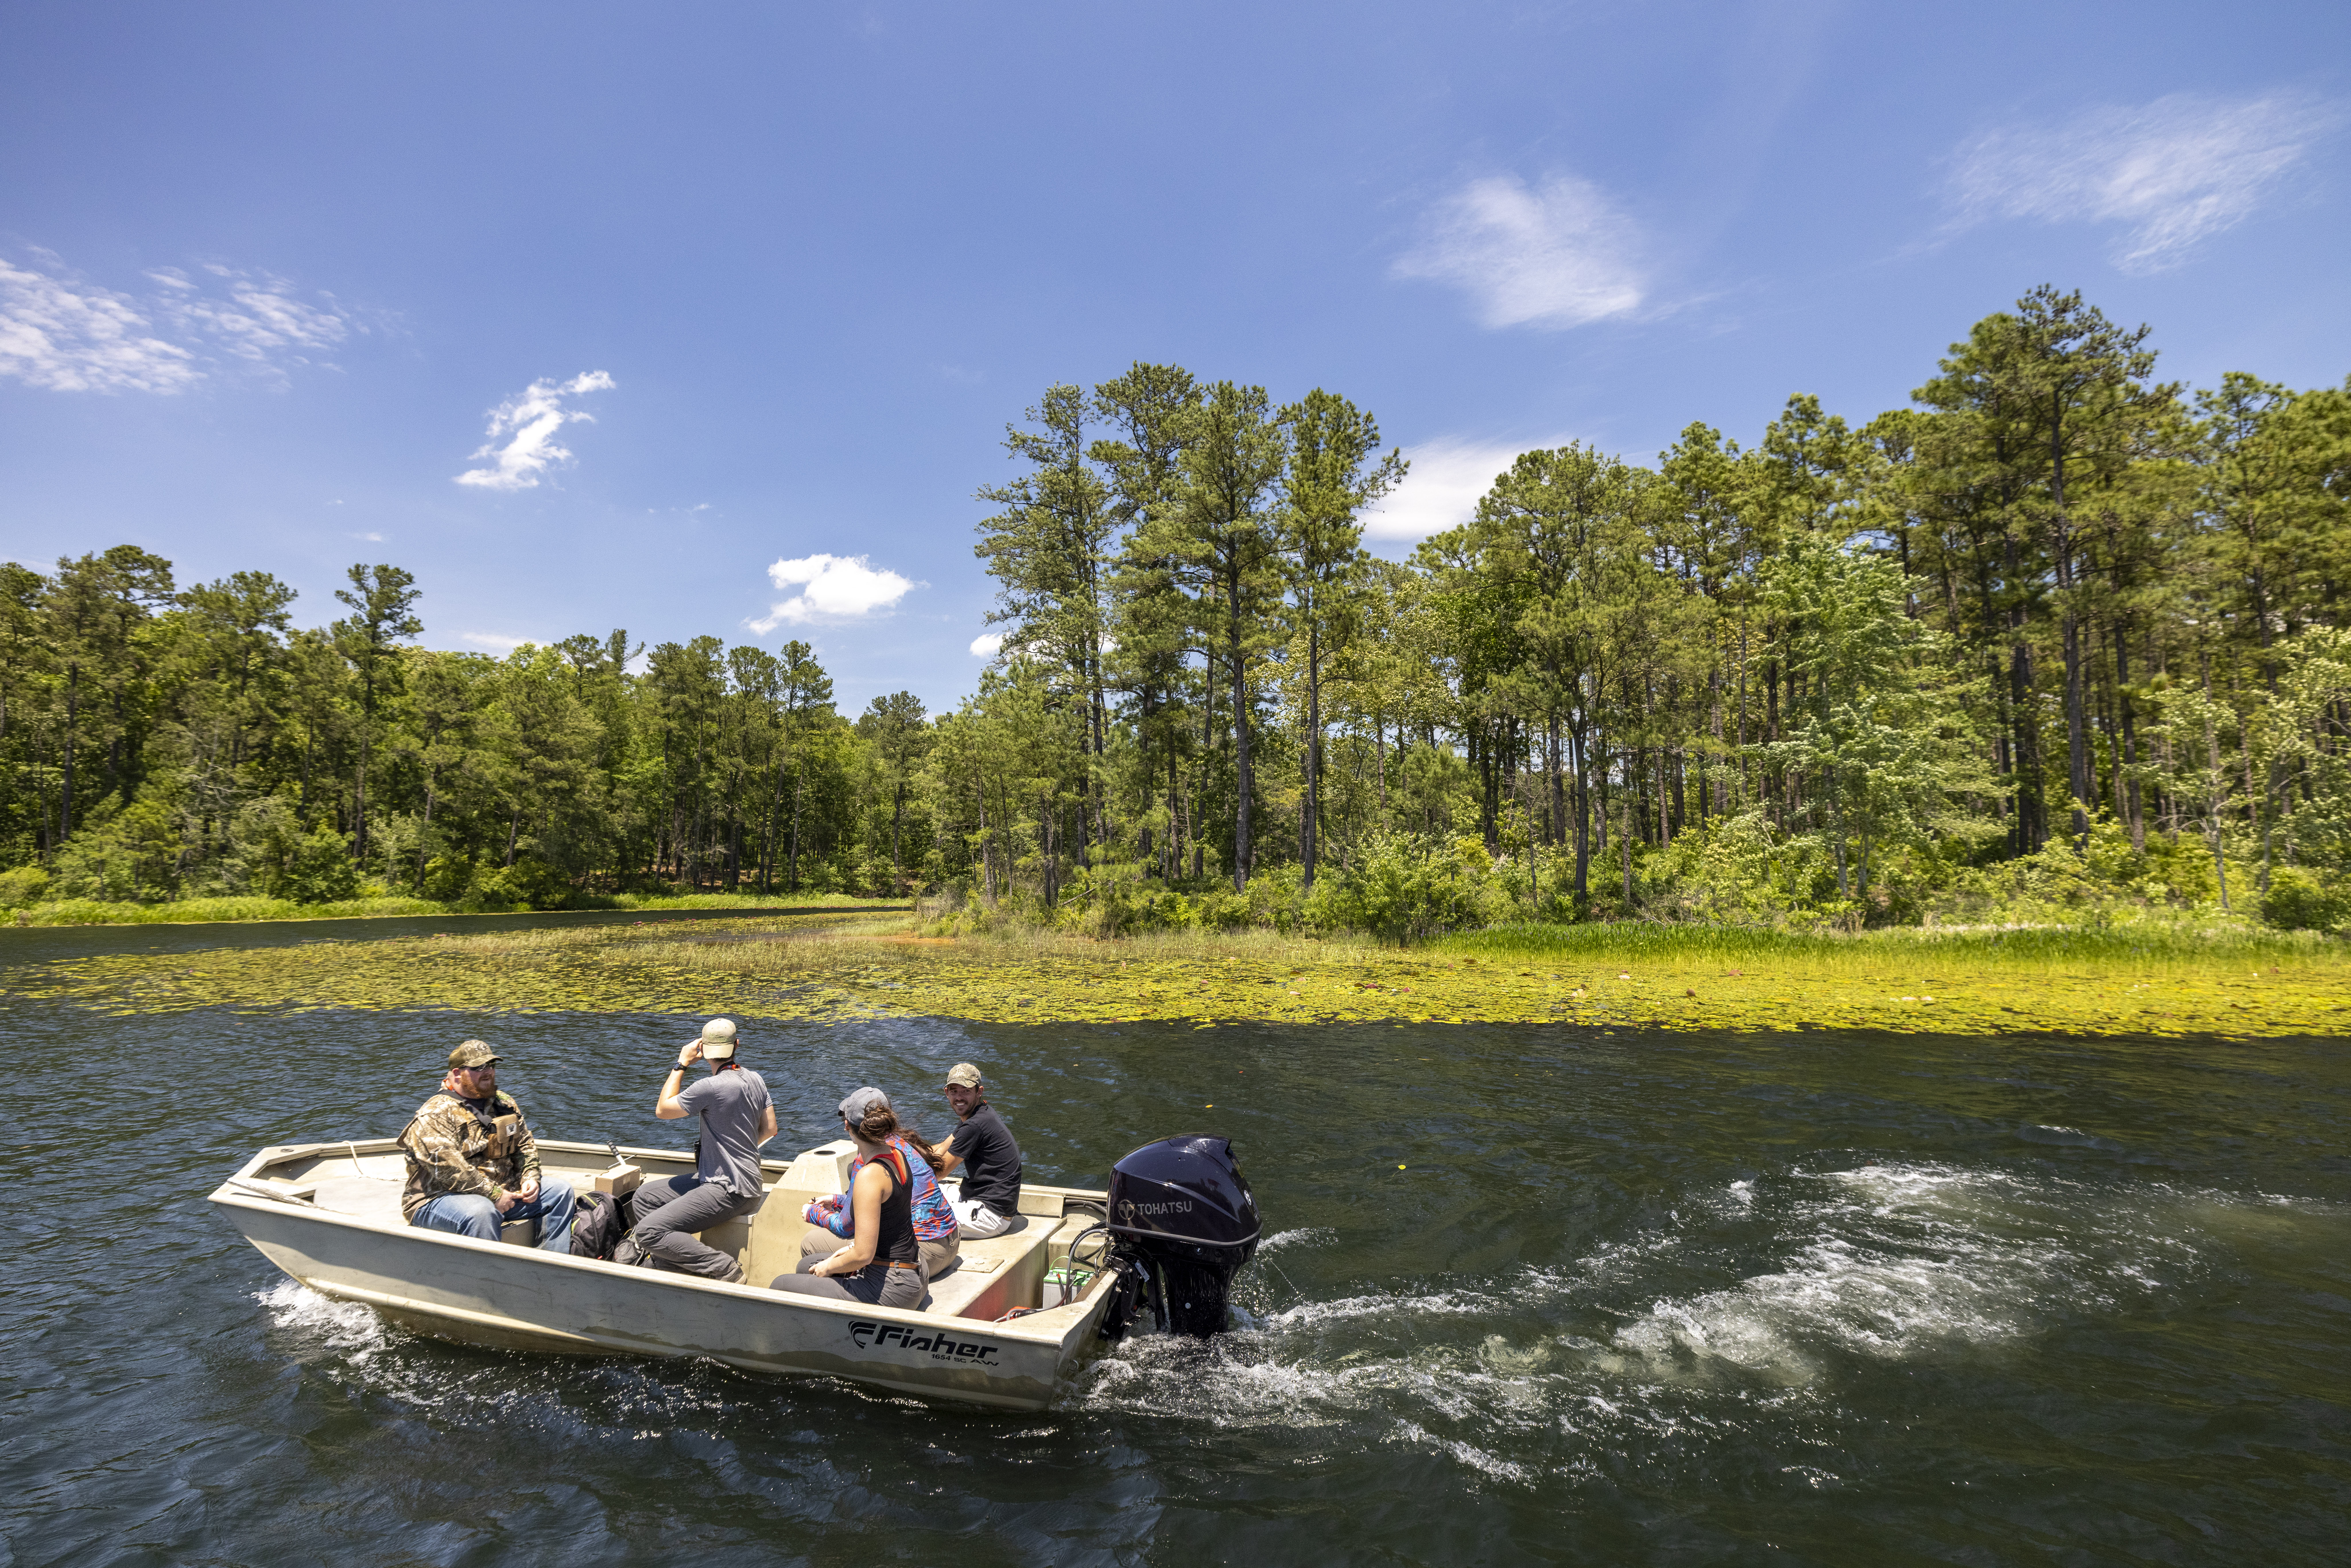 Five University of Georgia's forestry majors riding on a boat toward another part of the forest to collect plant samples